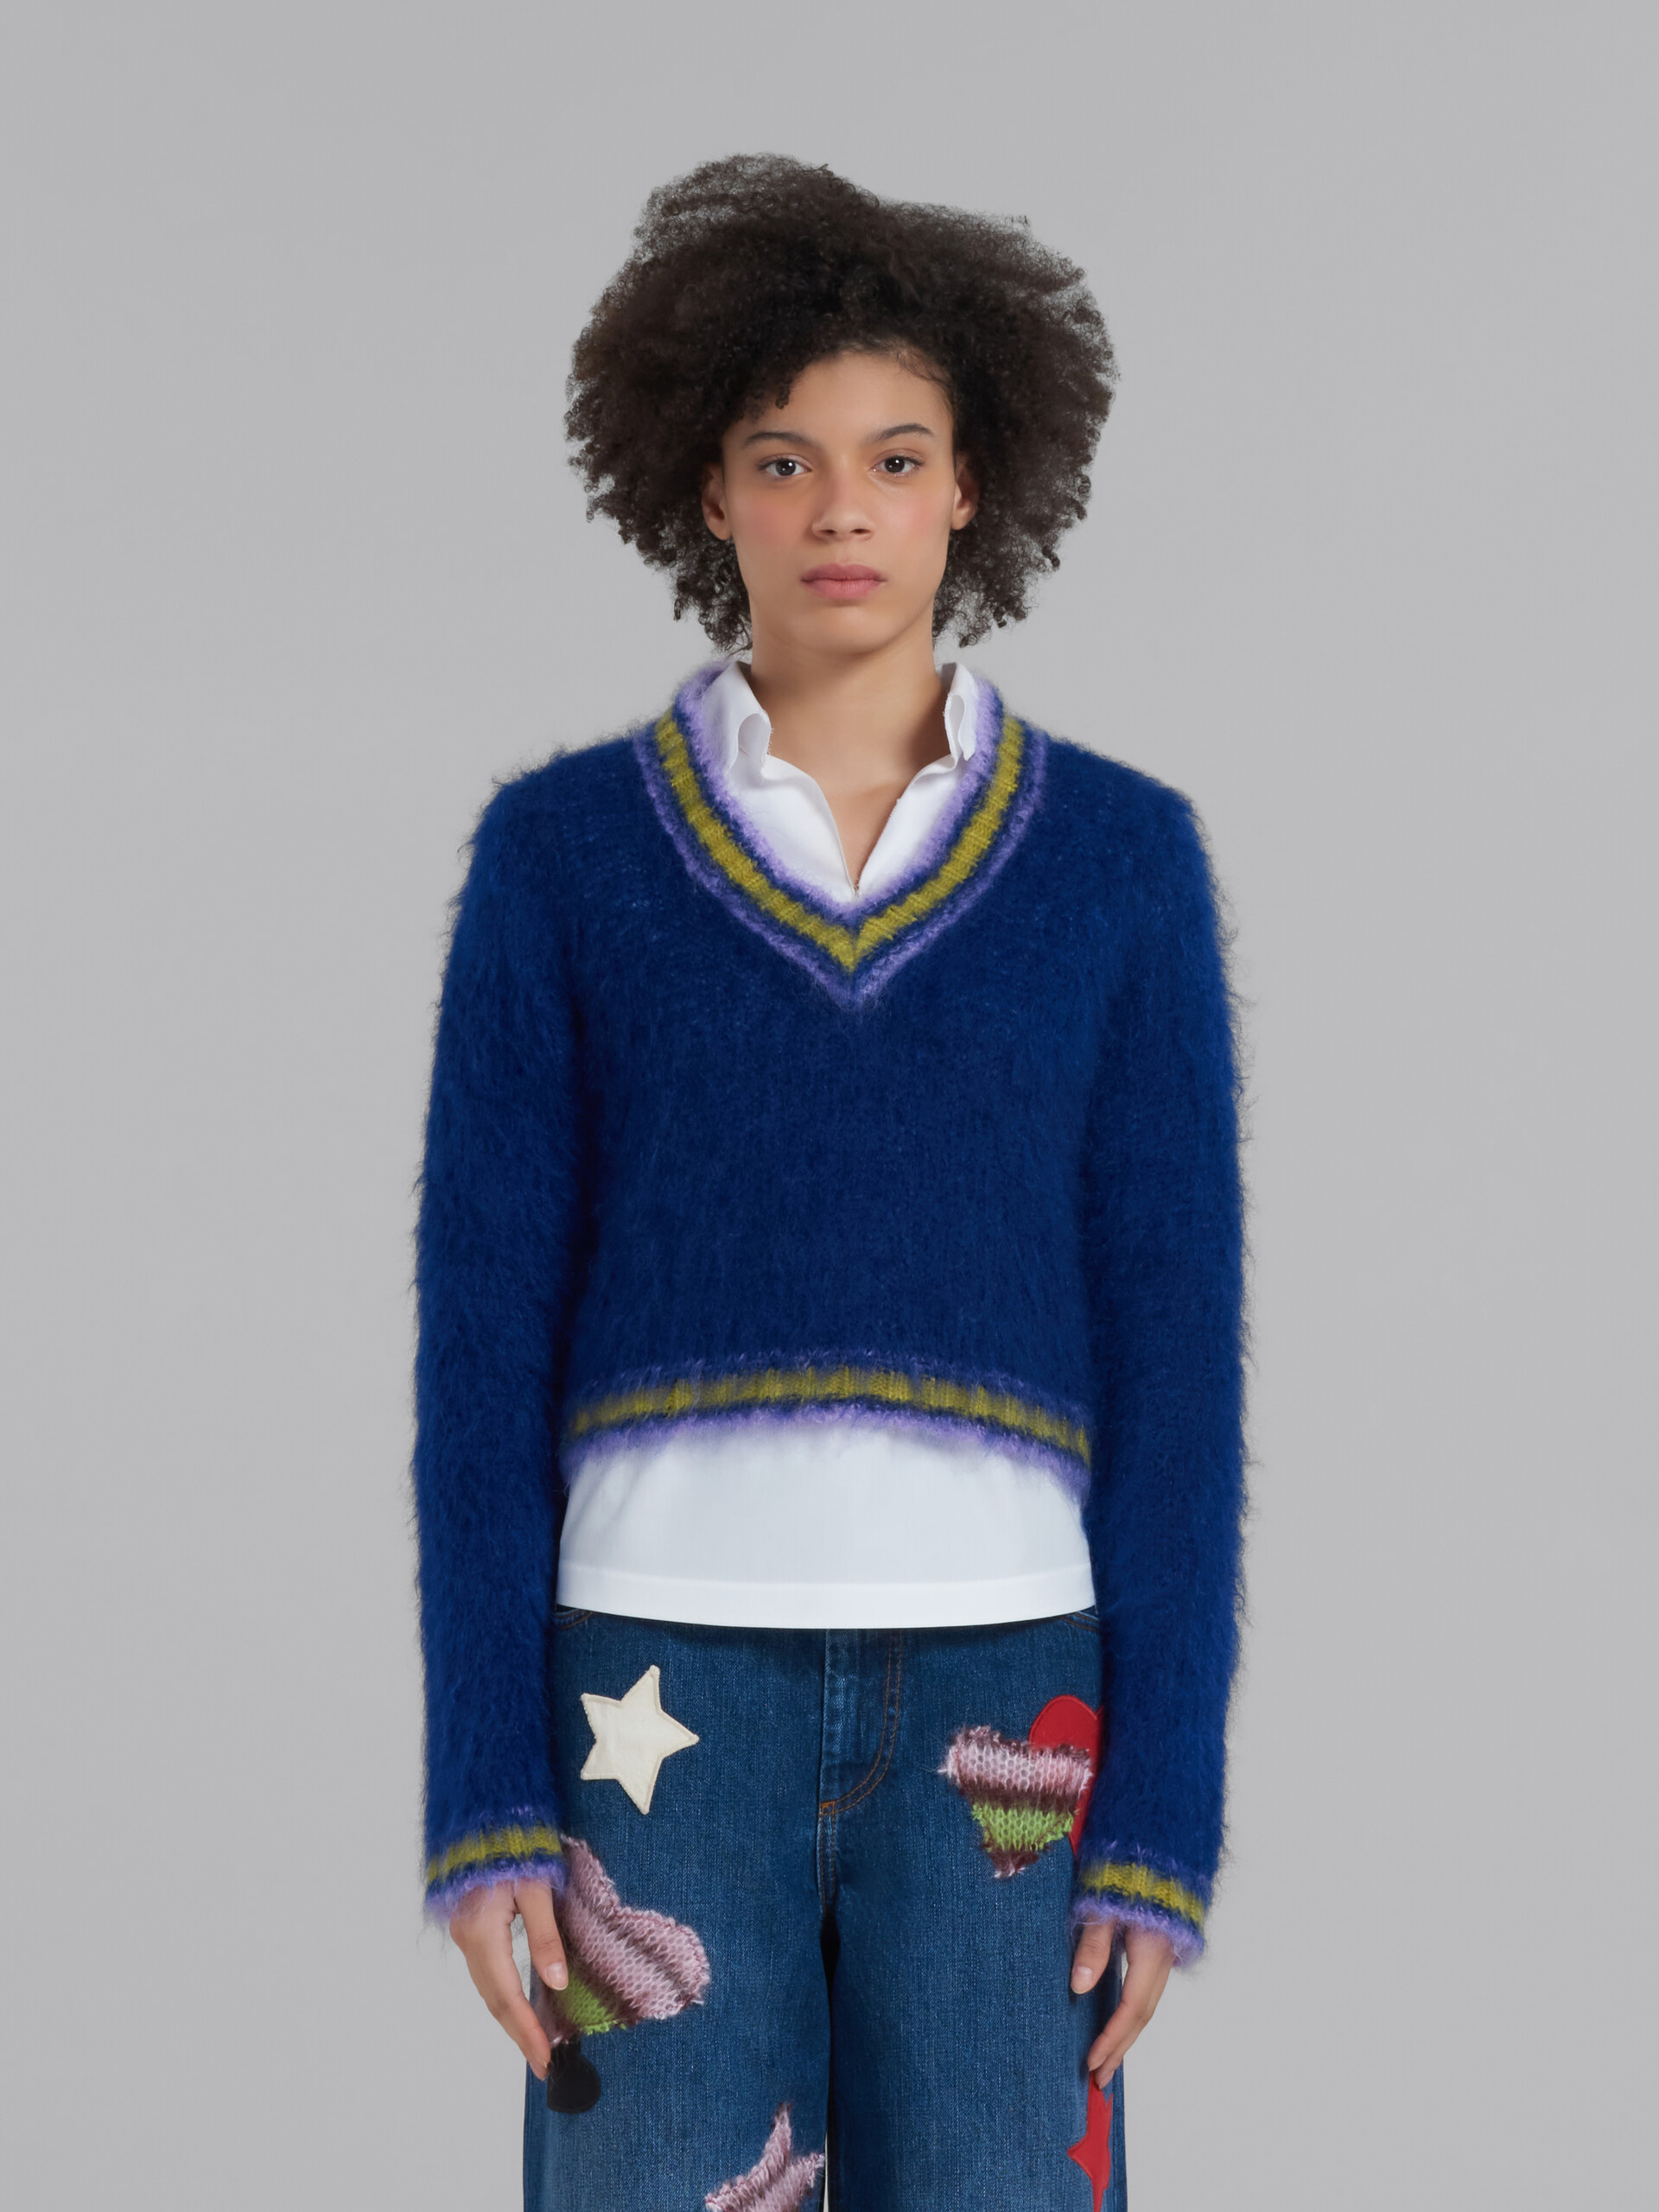 Blue mohair jumper with striped trims - Pullovers - Image 2